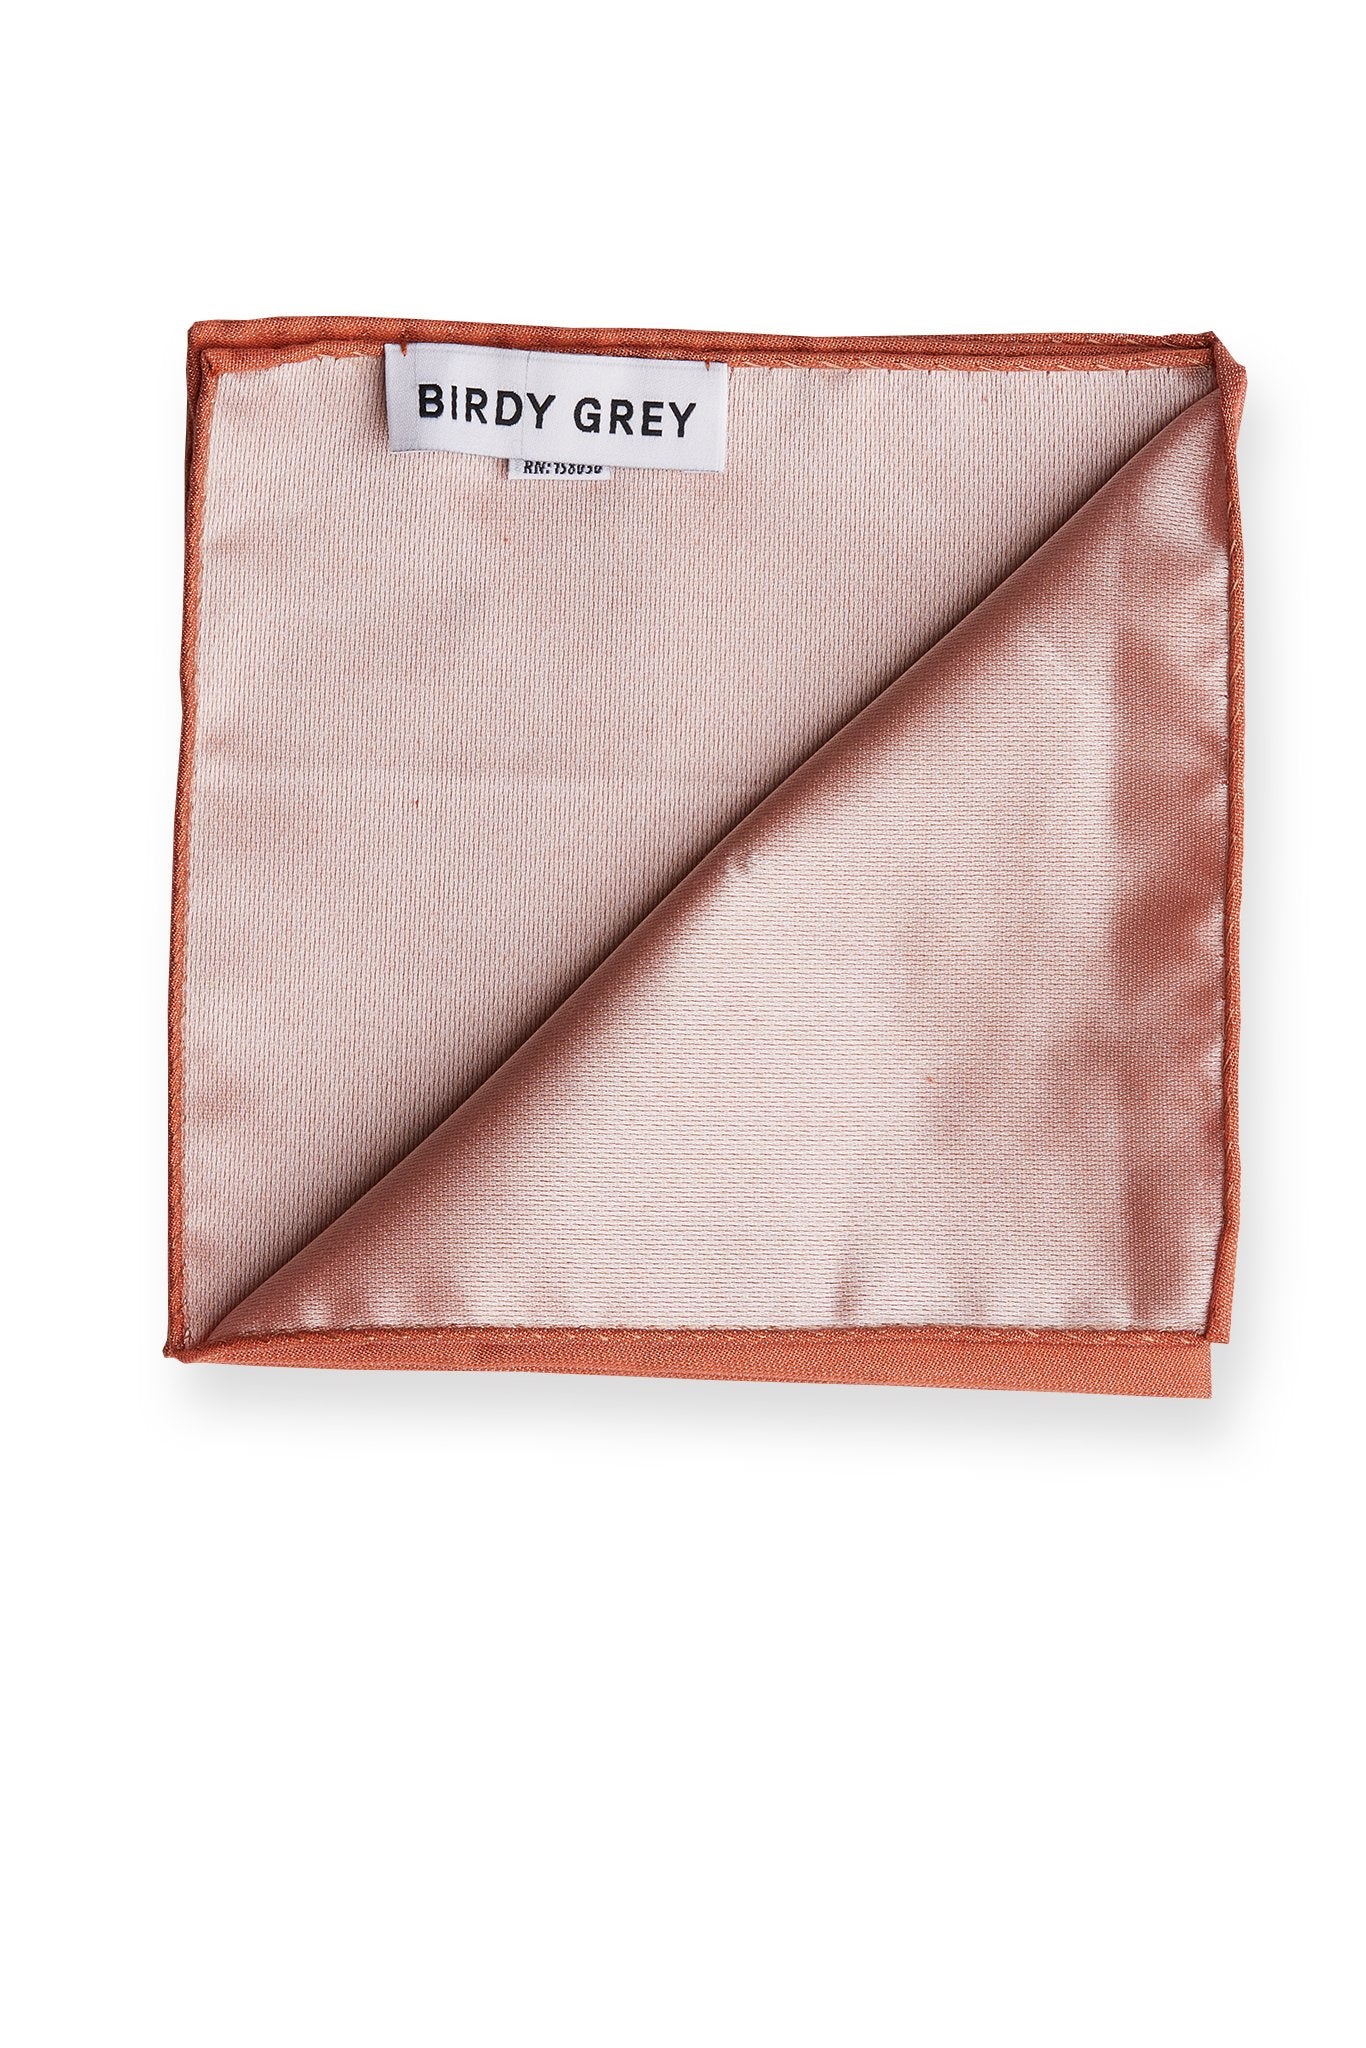 Didi Pocket Square in terracotta by Birdy Grey, interior view